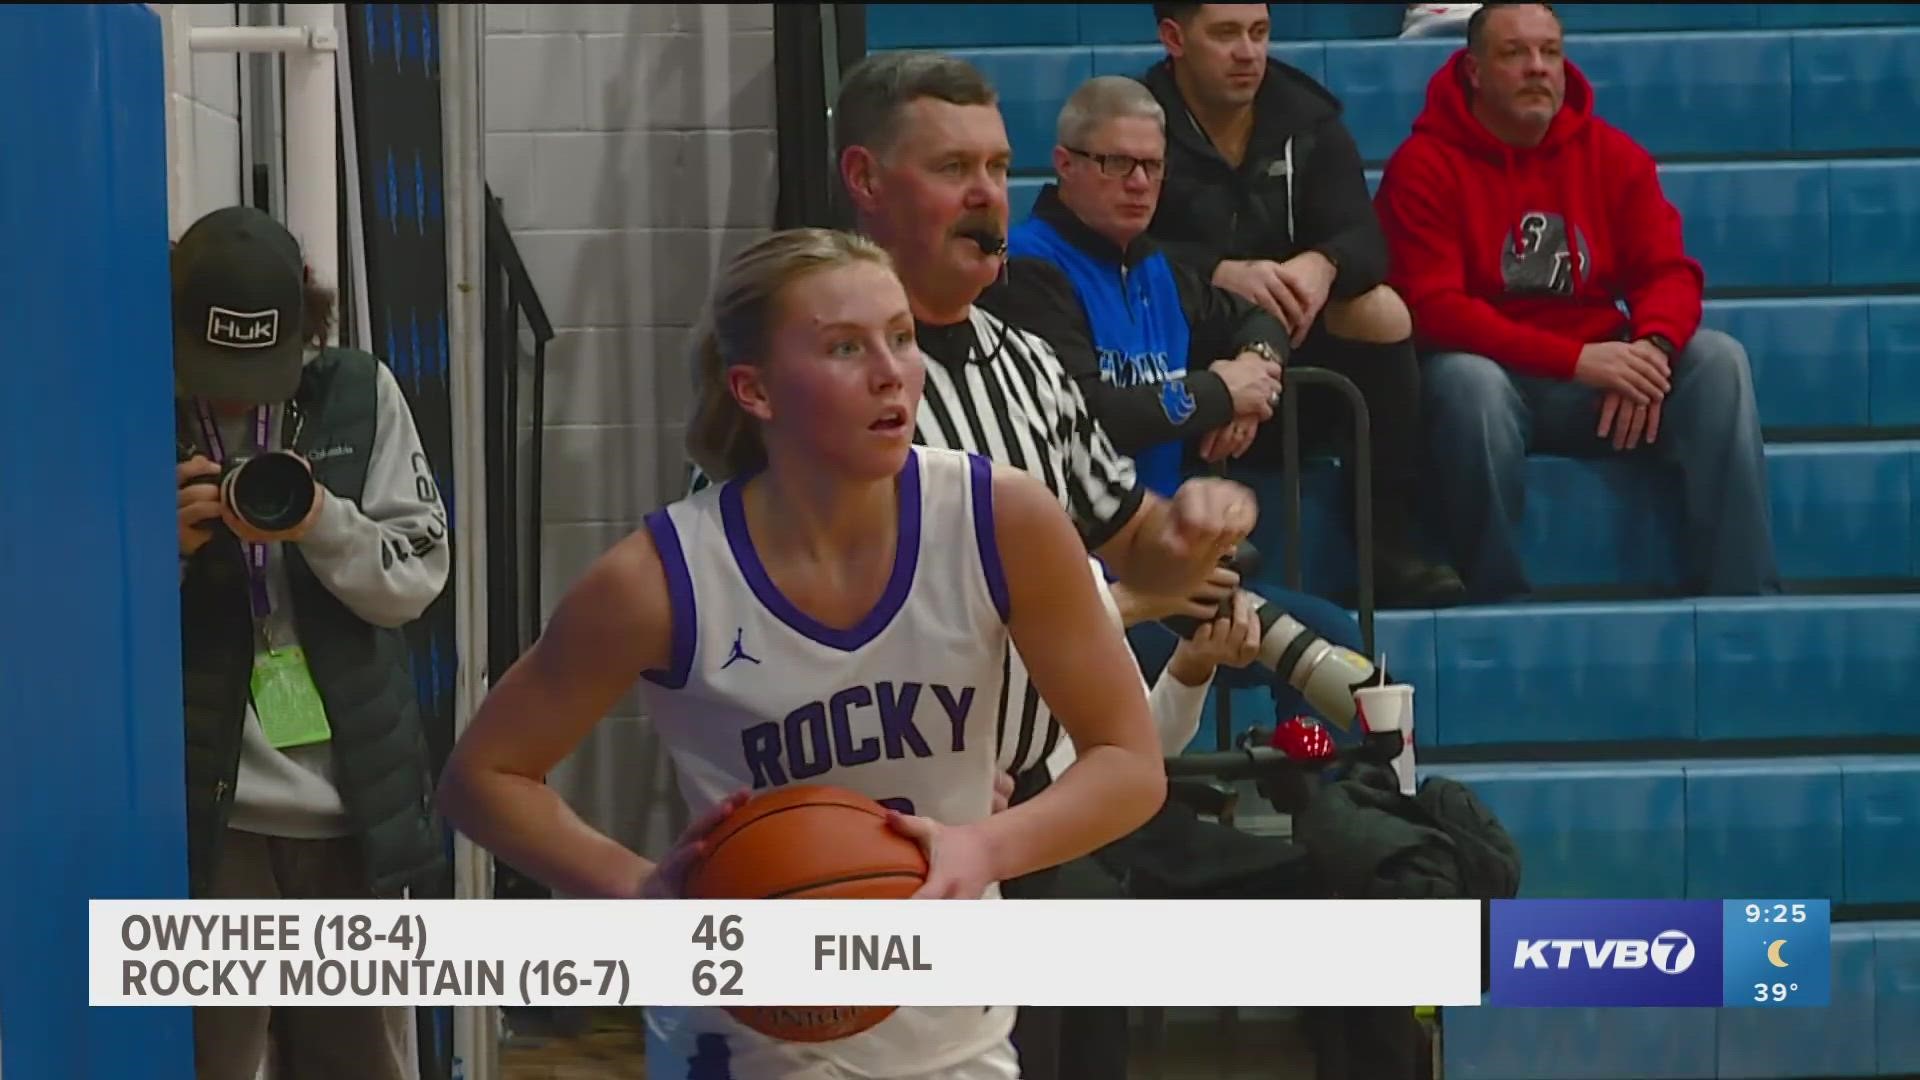 The Rocky Mountain Grizzlies will face Boise in the 5A Southern Idaho Conference title game after defeating Owyhee Saturday night 62-46.